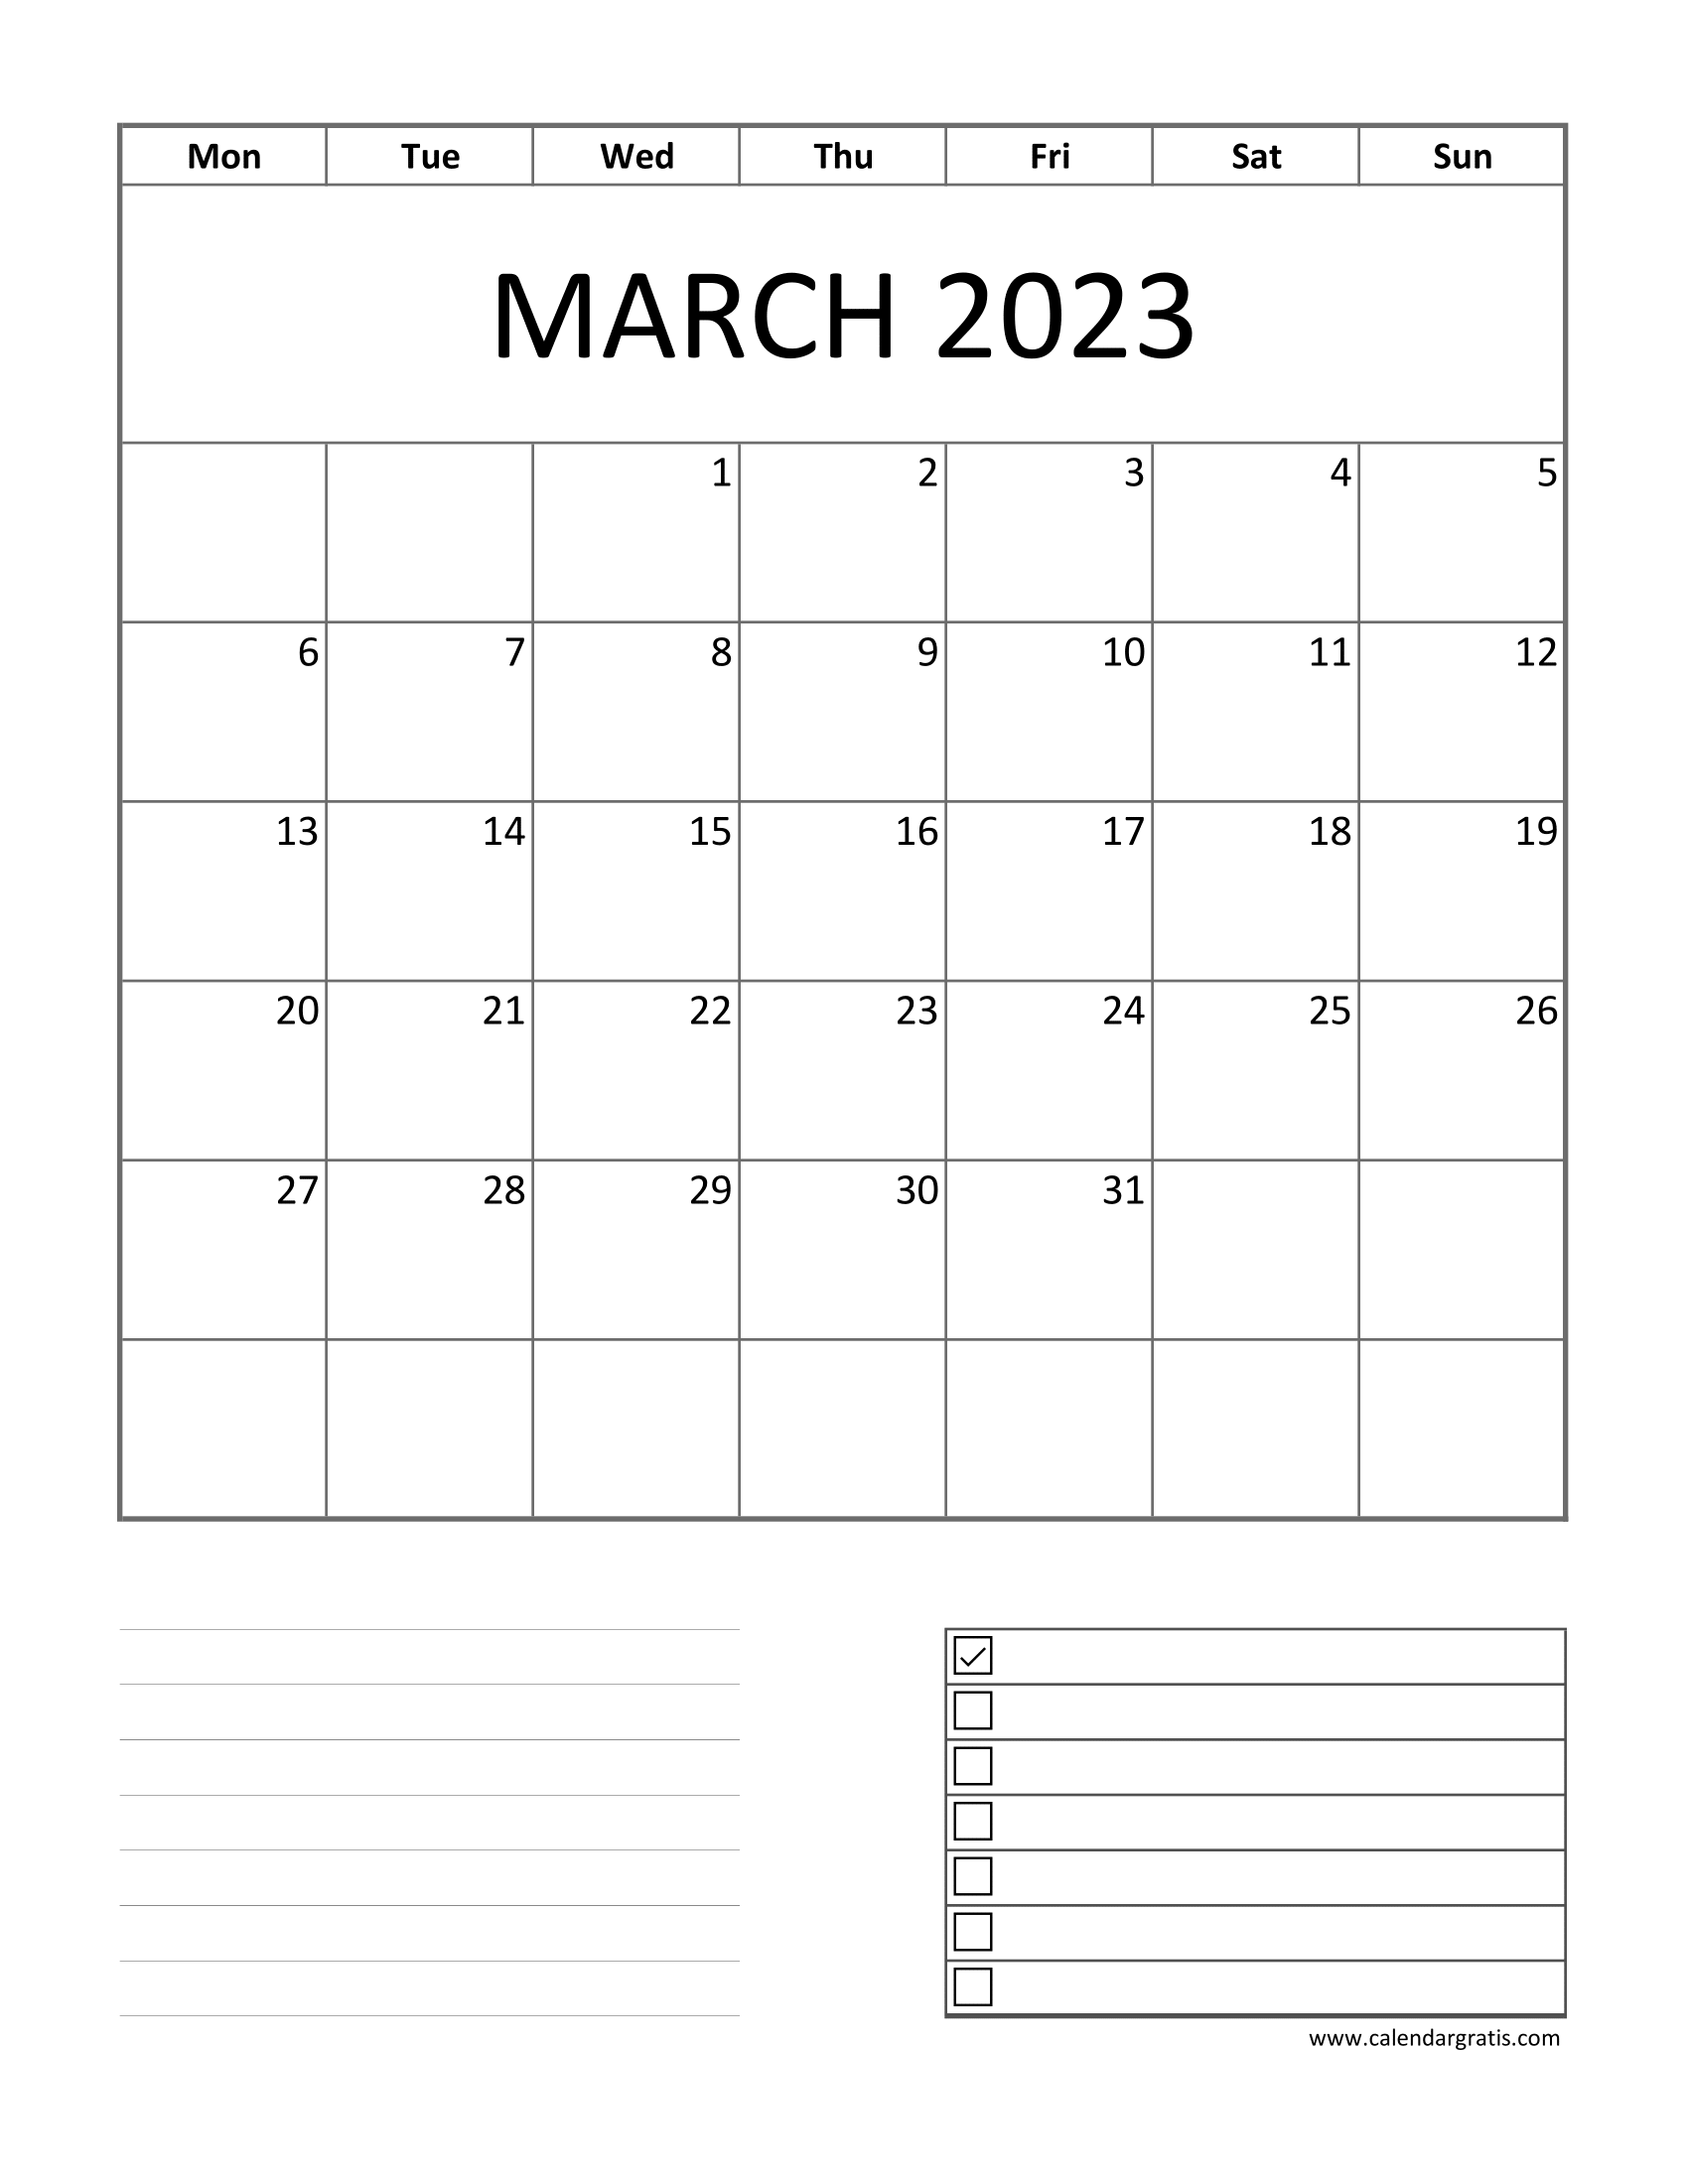 Printable Monday start calendar for March 2023 with notes section, lines, to-do list, checkboxes.